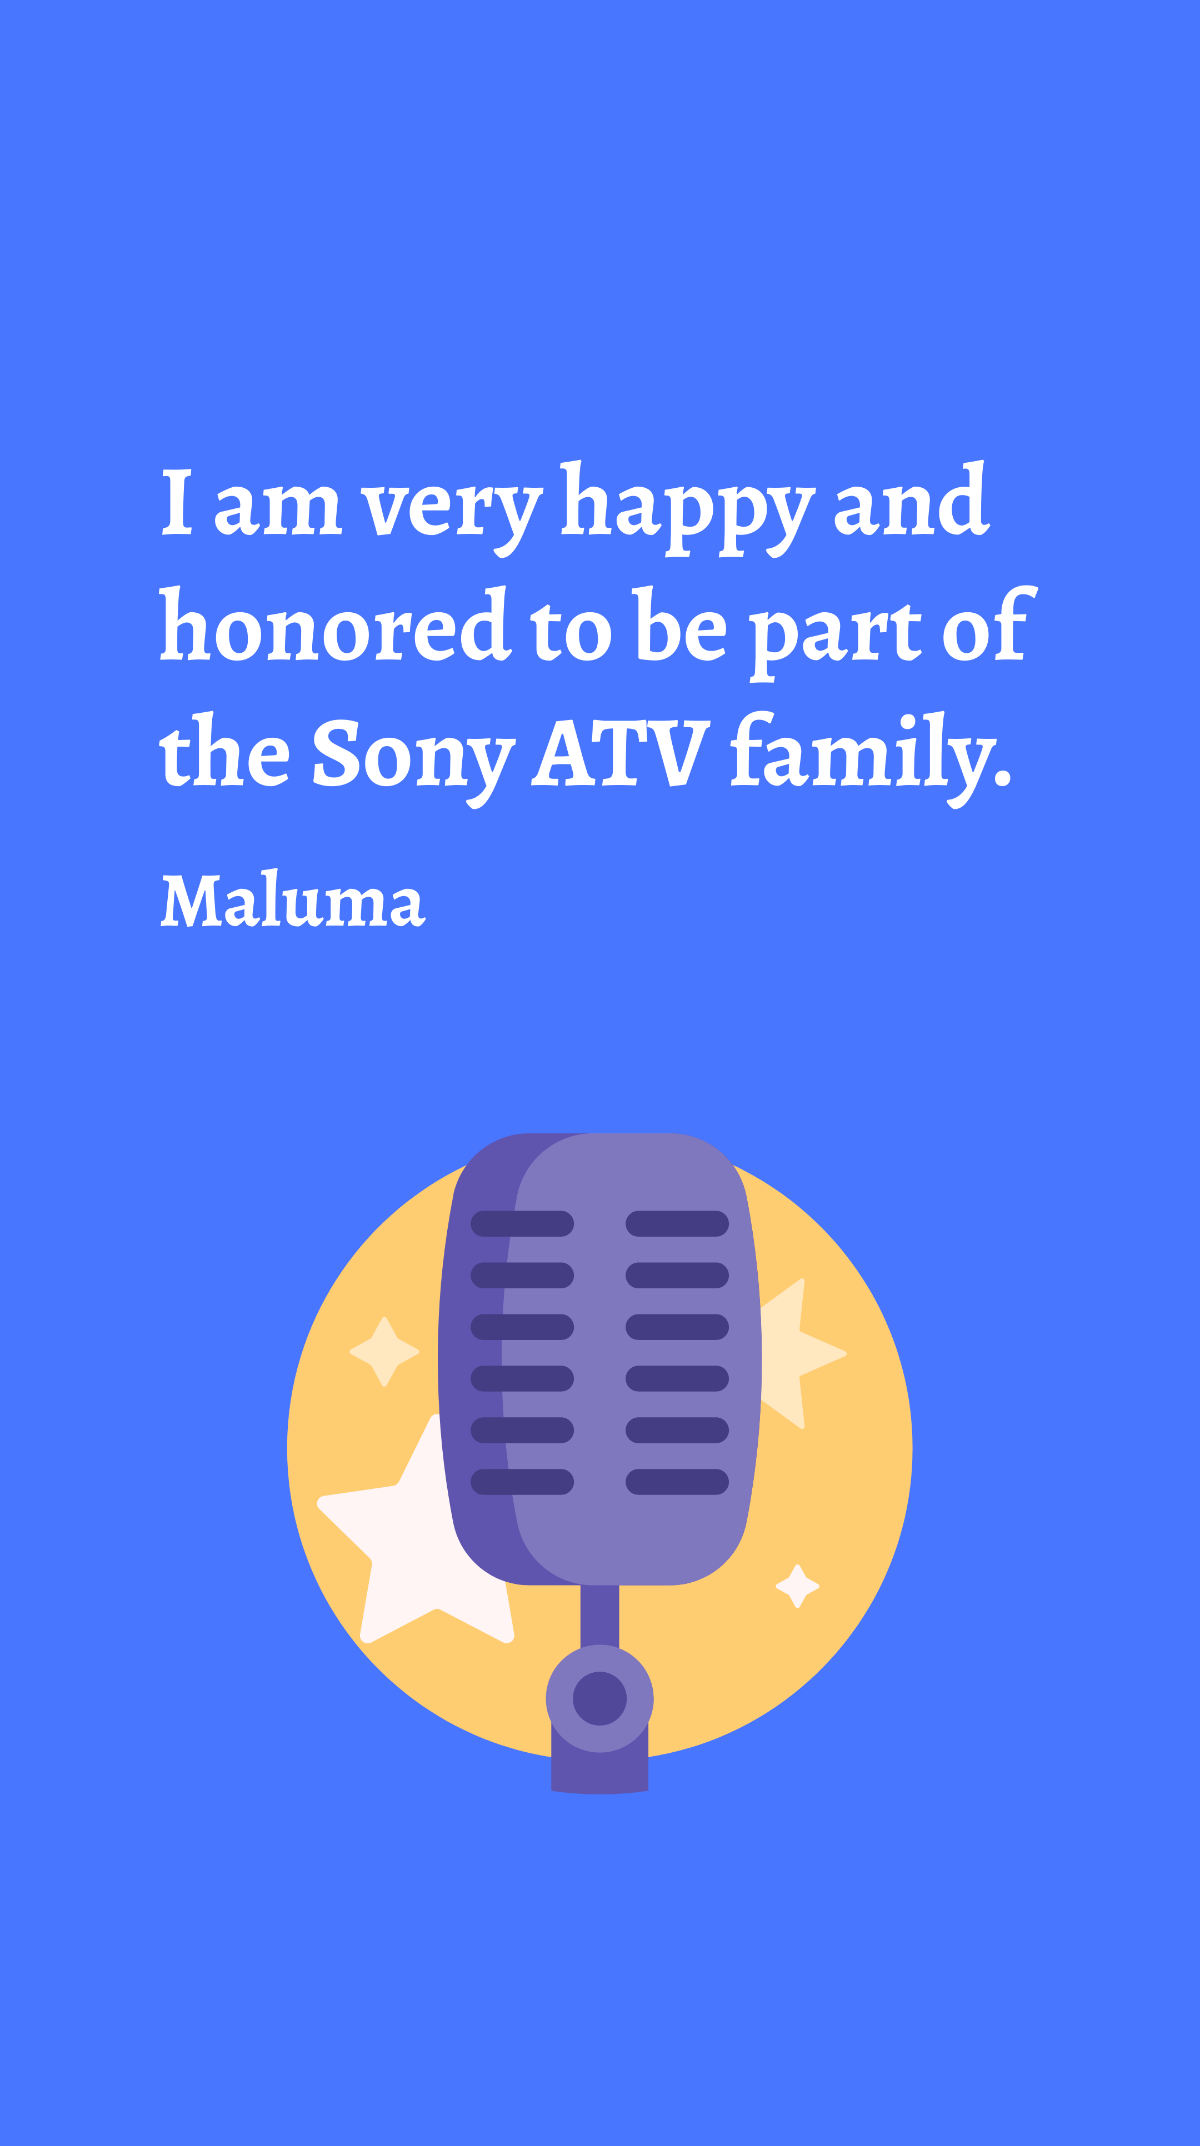 Maluma - I am very happy and honored to be part of the Sony ATV family. Template